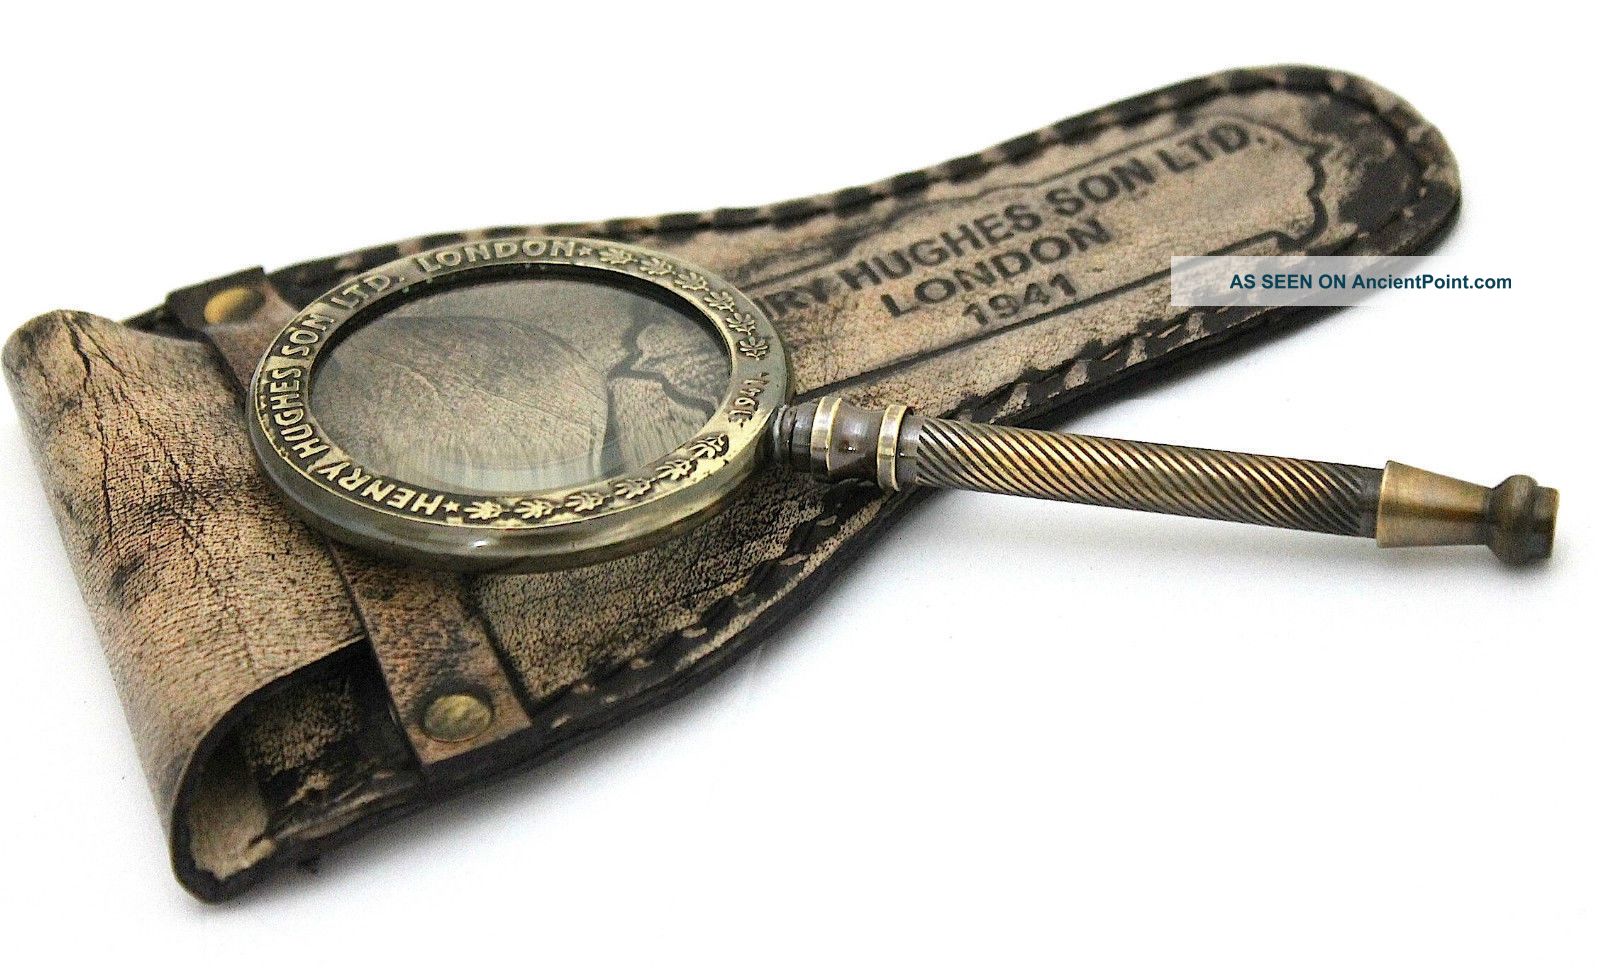 Sherlock Holmes Hand Lens Vintage Old Patina Bras Magnifying Glass Antique Mg 01 Telescopes photo